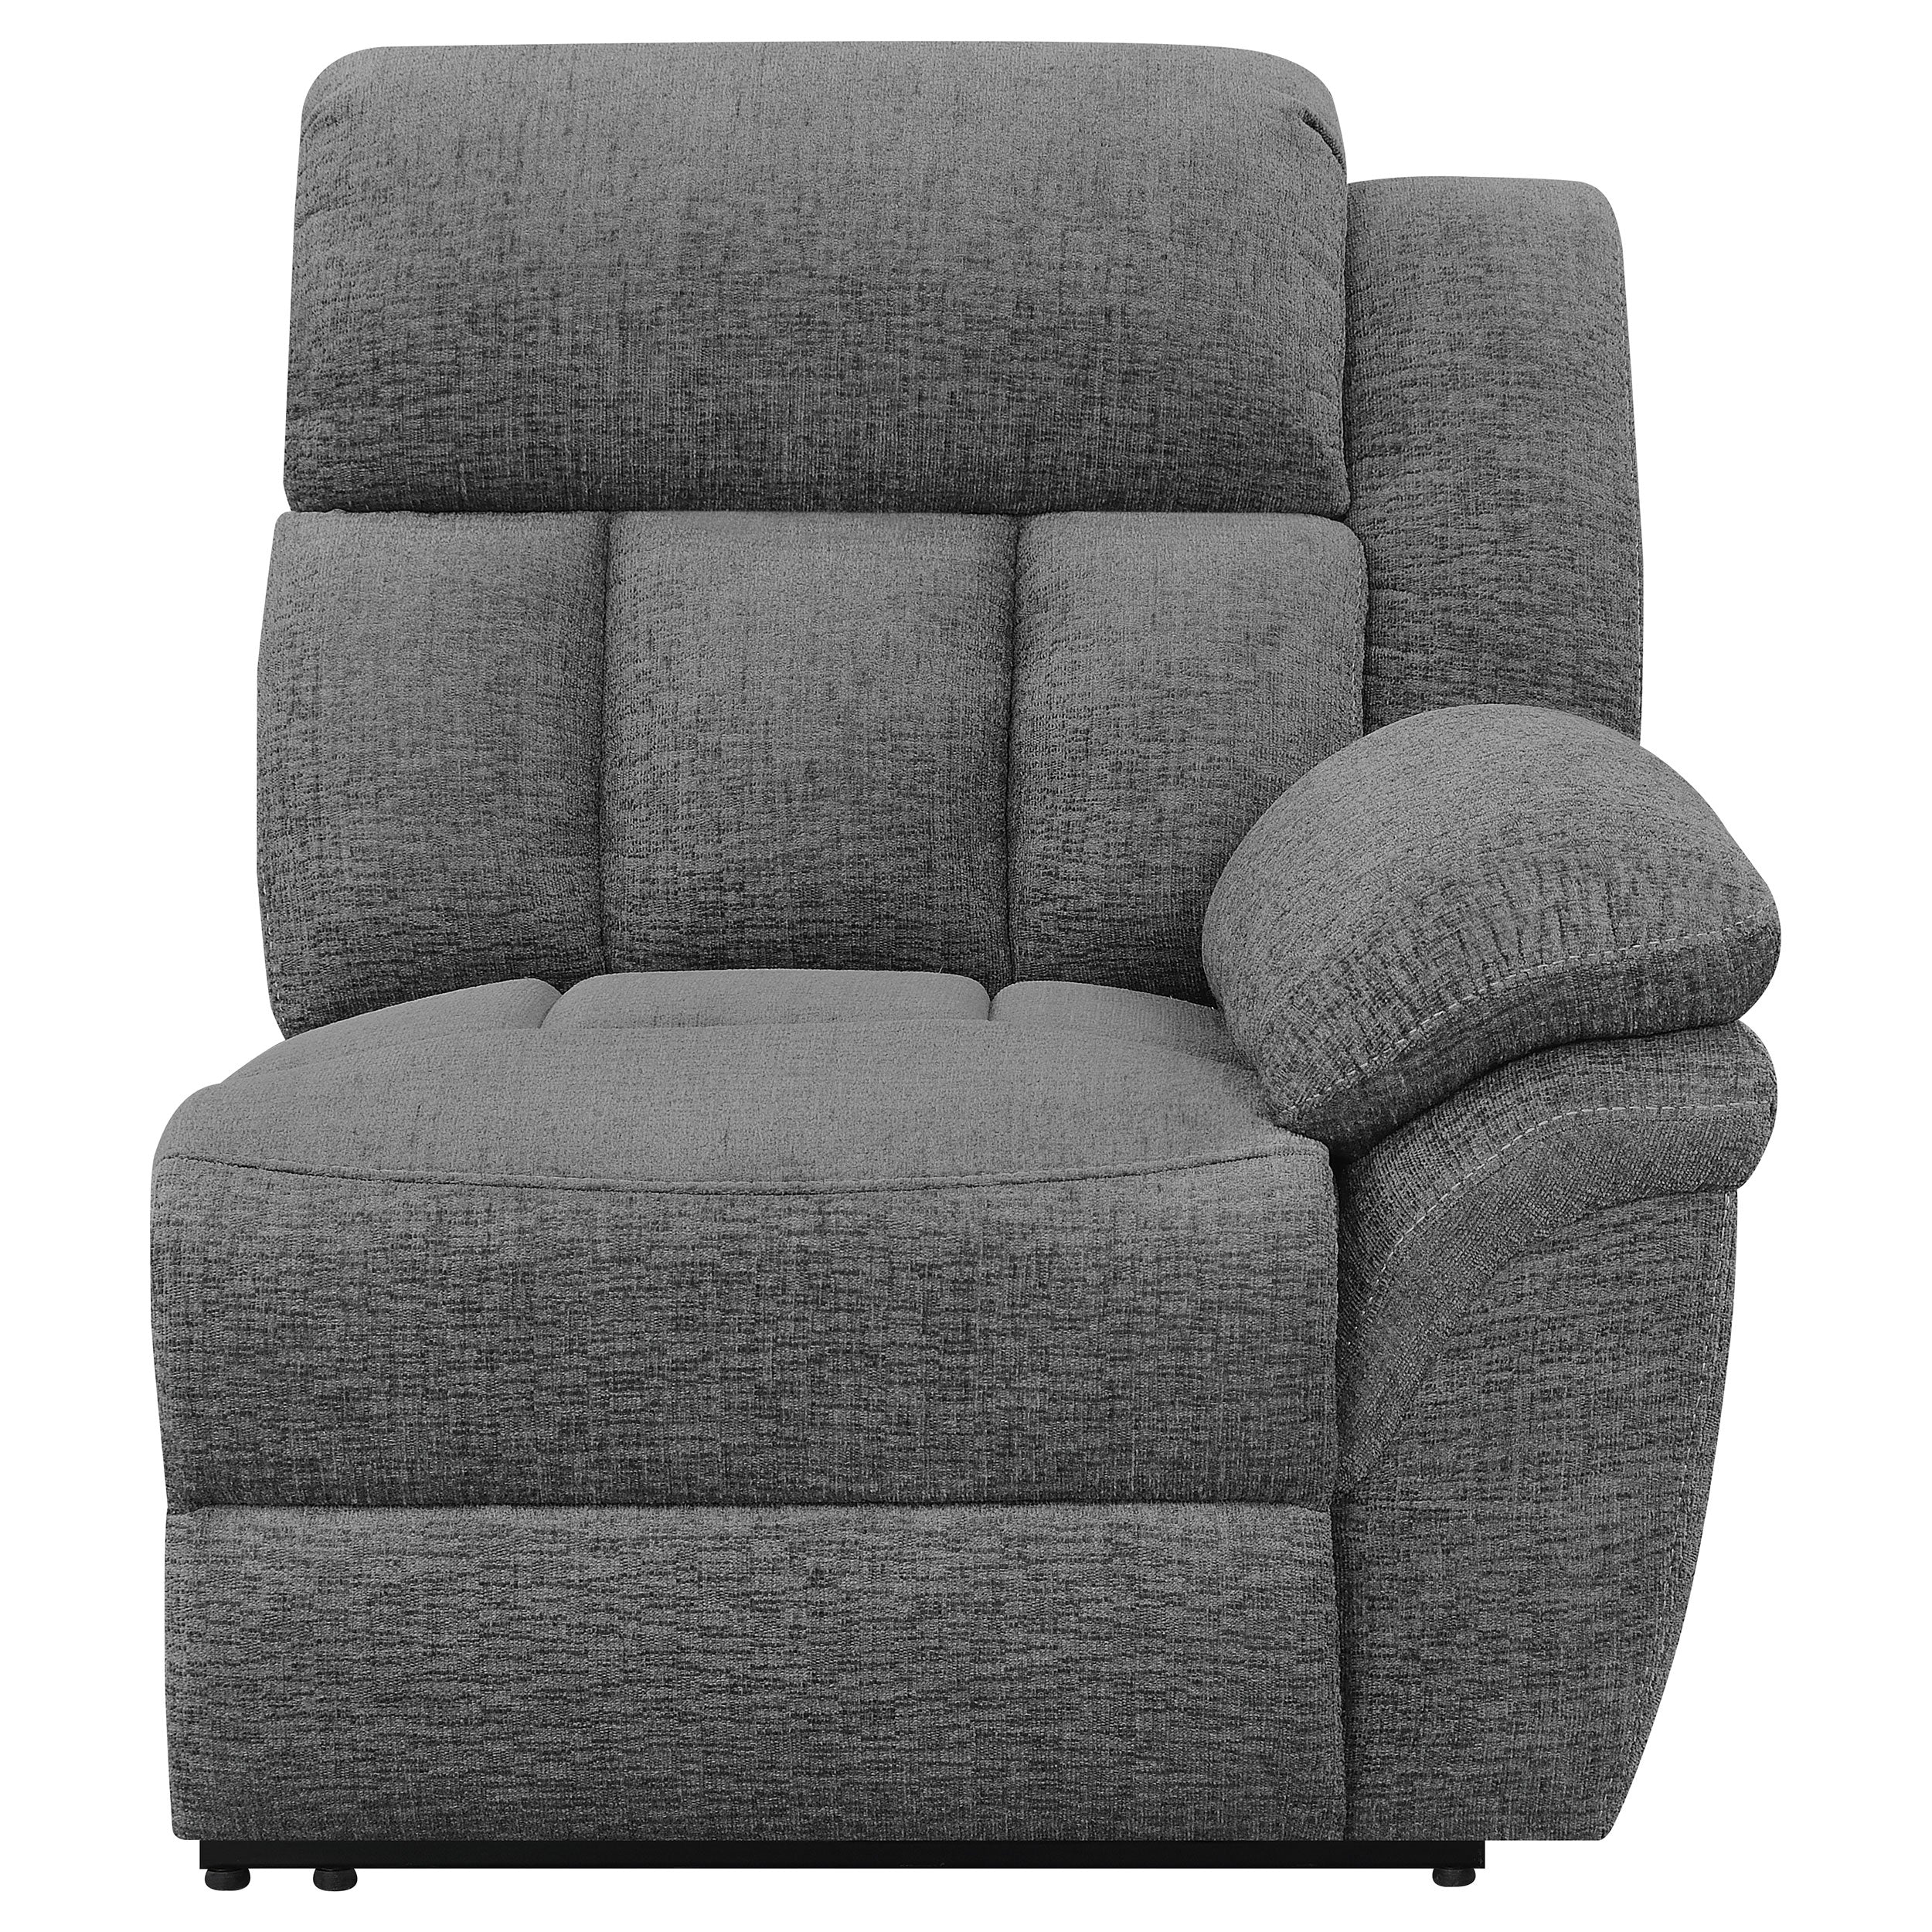 Coaster Bahrain Upholstered Home Theater Seating Charcoal Default Title